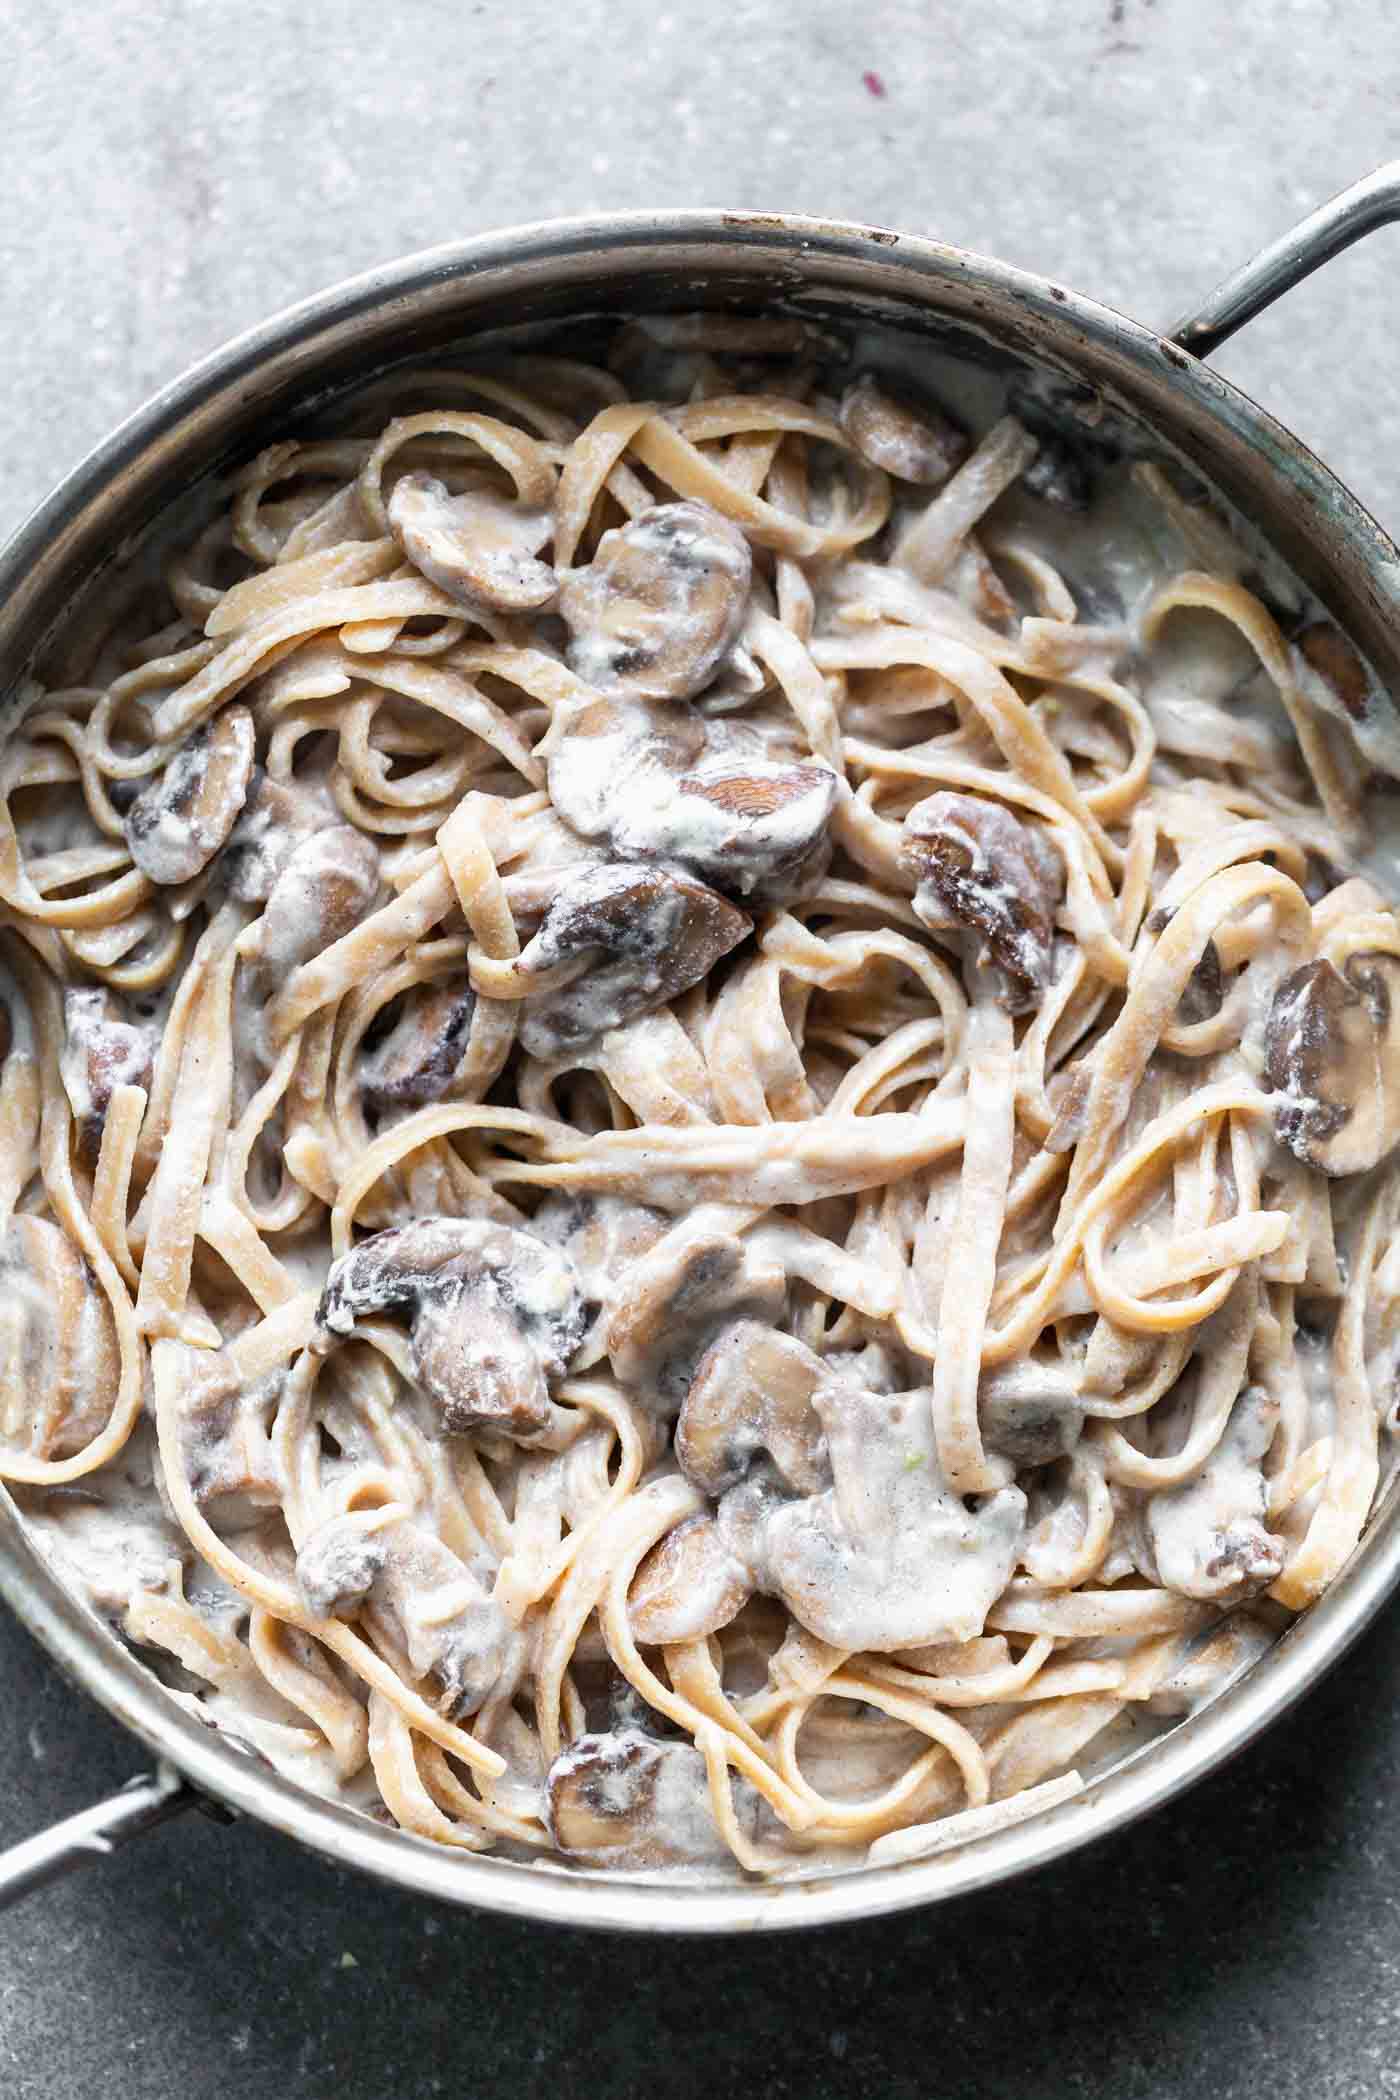 Creamy Mushroom and Ricotta Pasta is the perfect way to get your pasta fix this winter season! Easy to prepare with minimal ingredients and a sure-fire hit with pasta lovers.